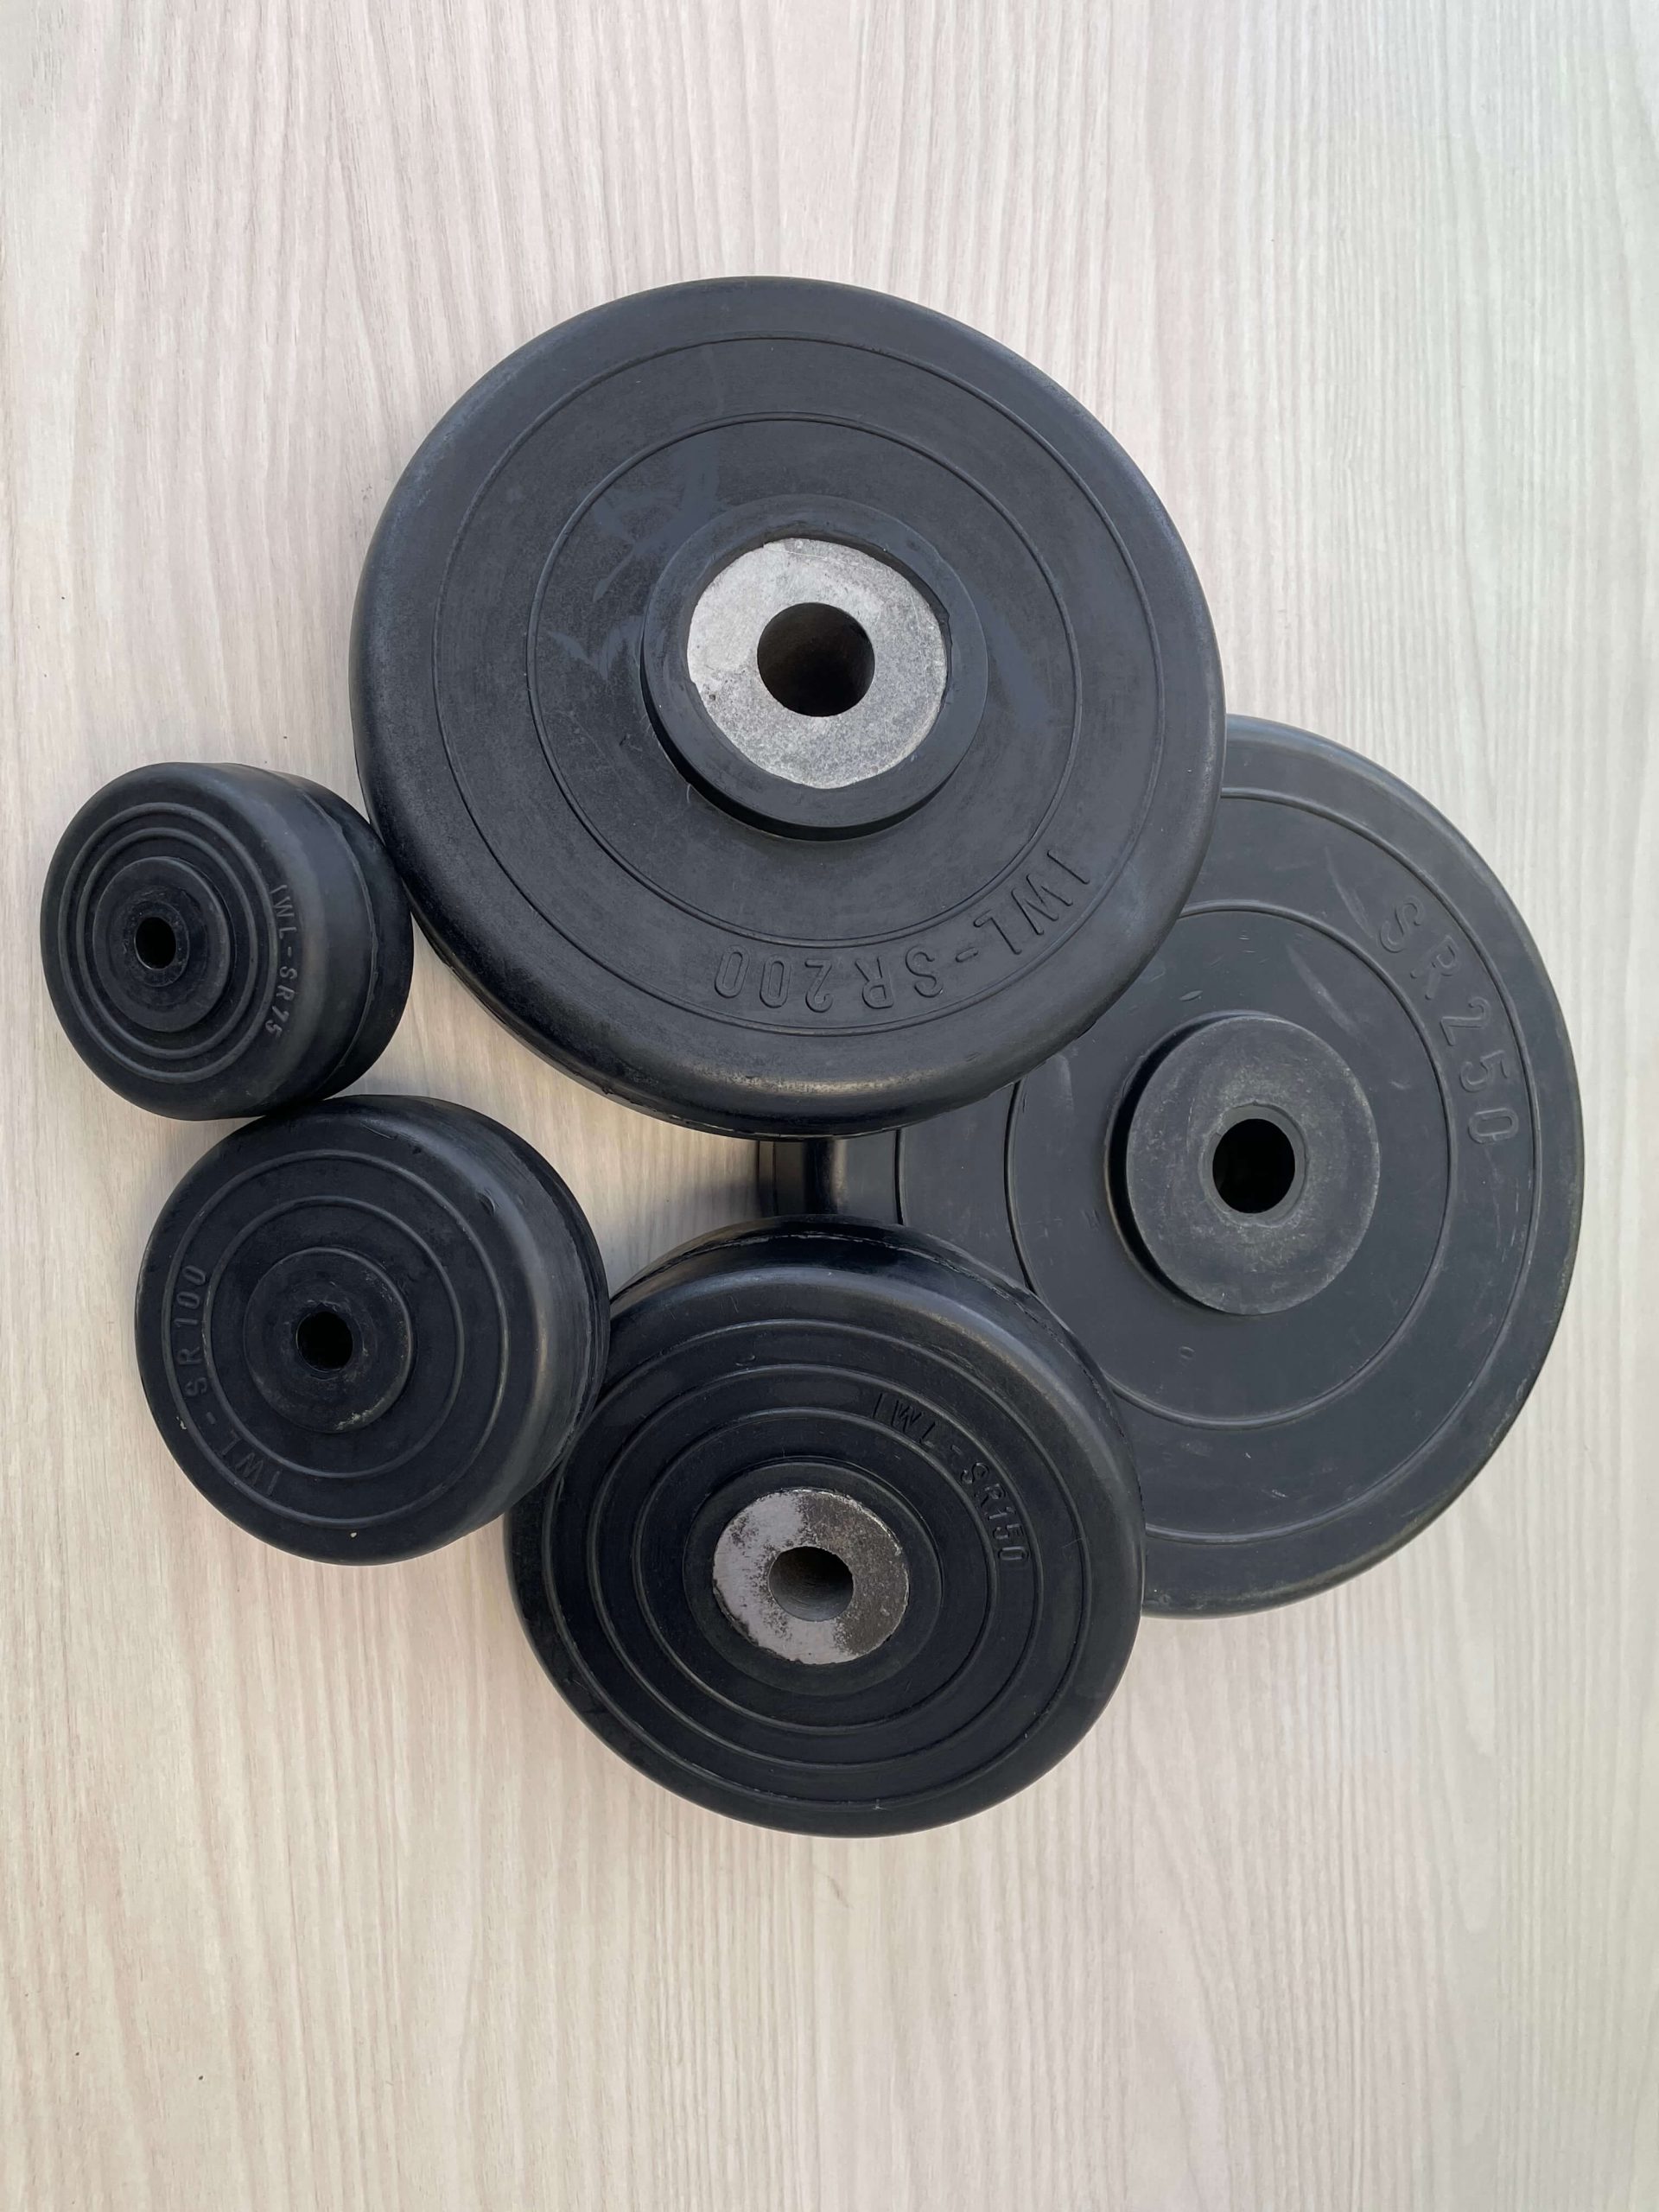 High quality, locally made solid rubber wheels made by Rubber Developments LTD NZ